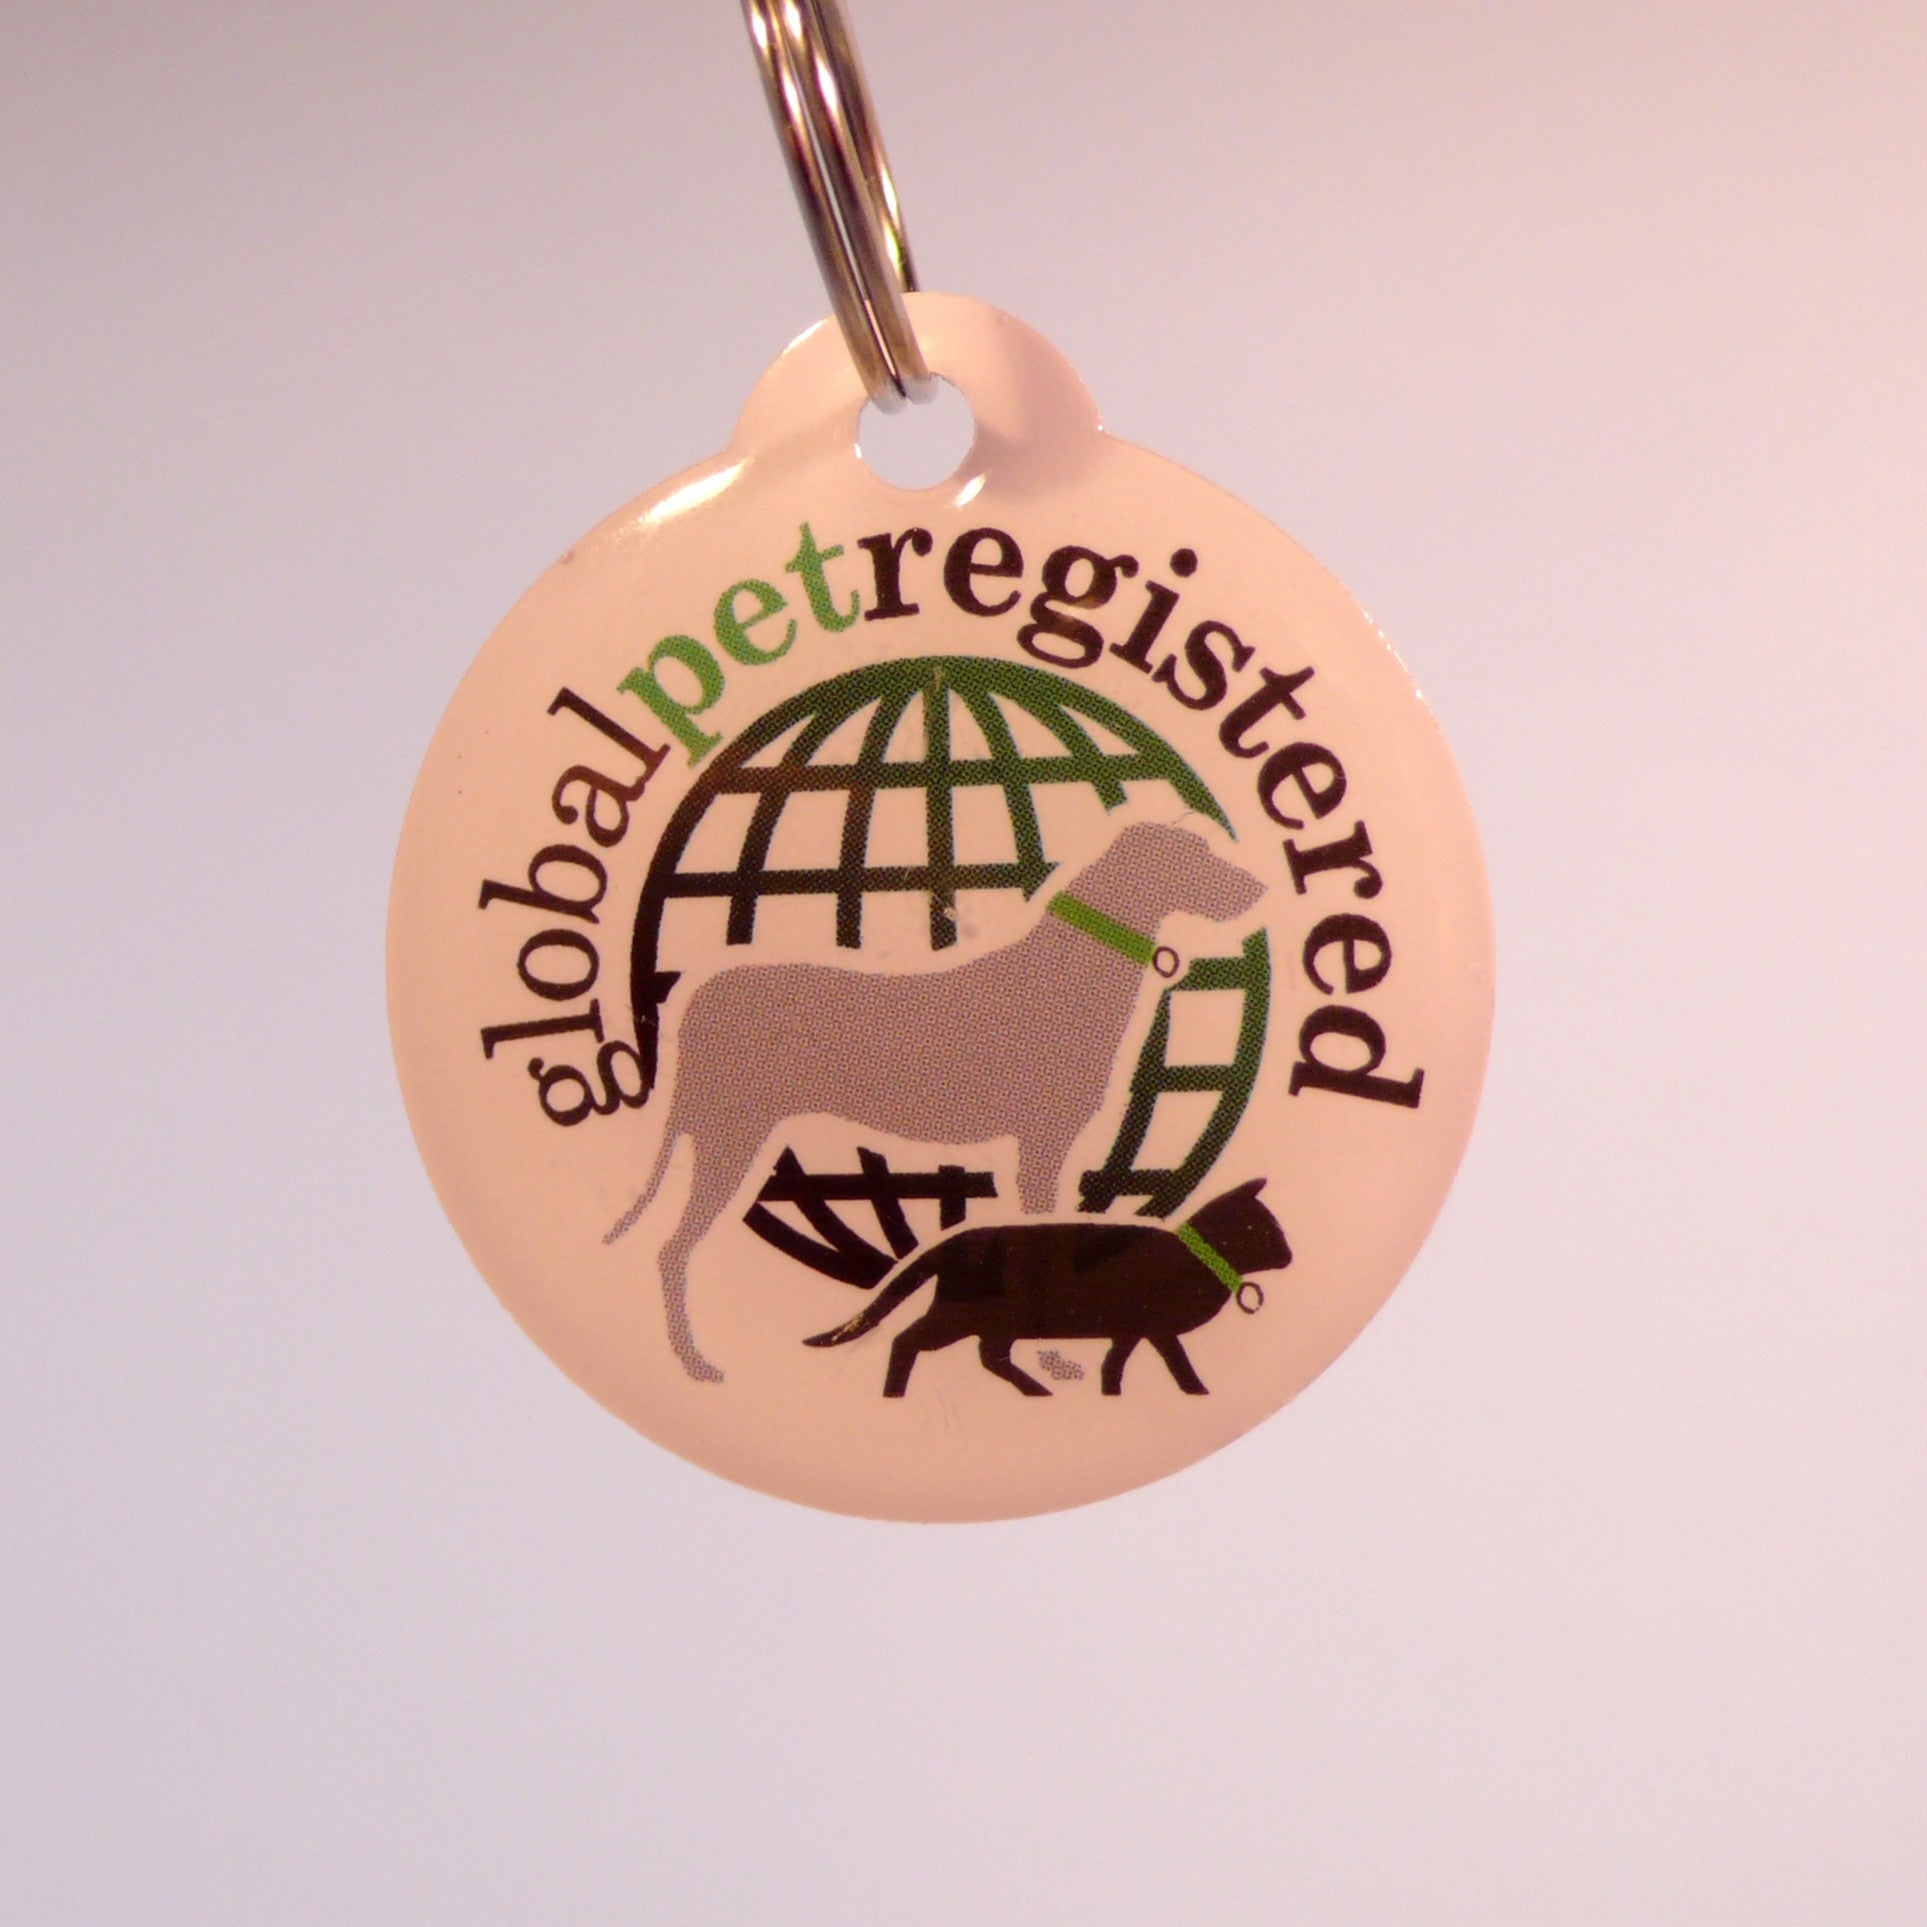 Replacement Pet Tags for existing customers only – GPRSOS